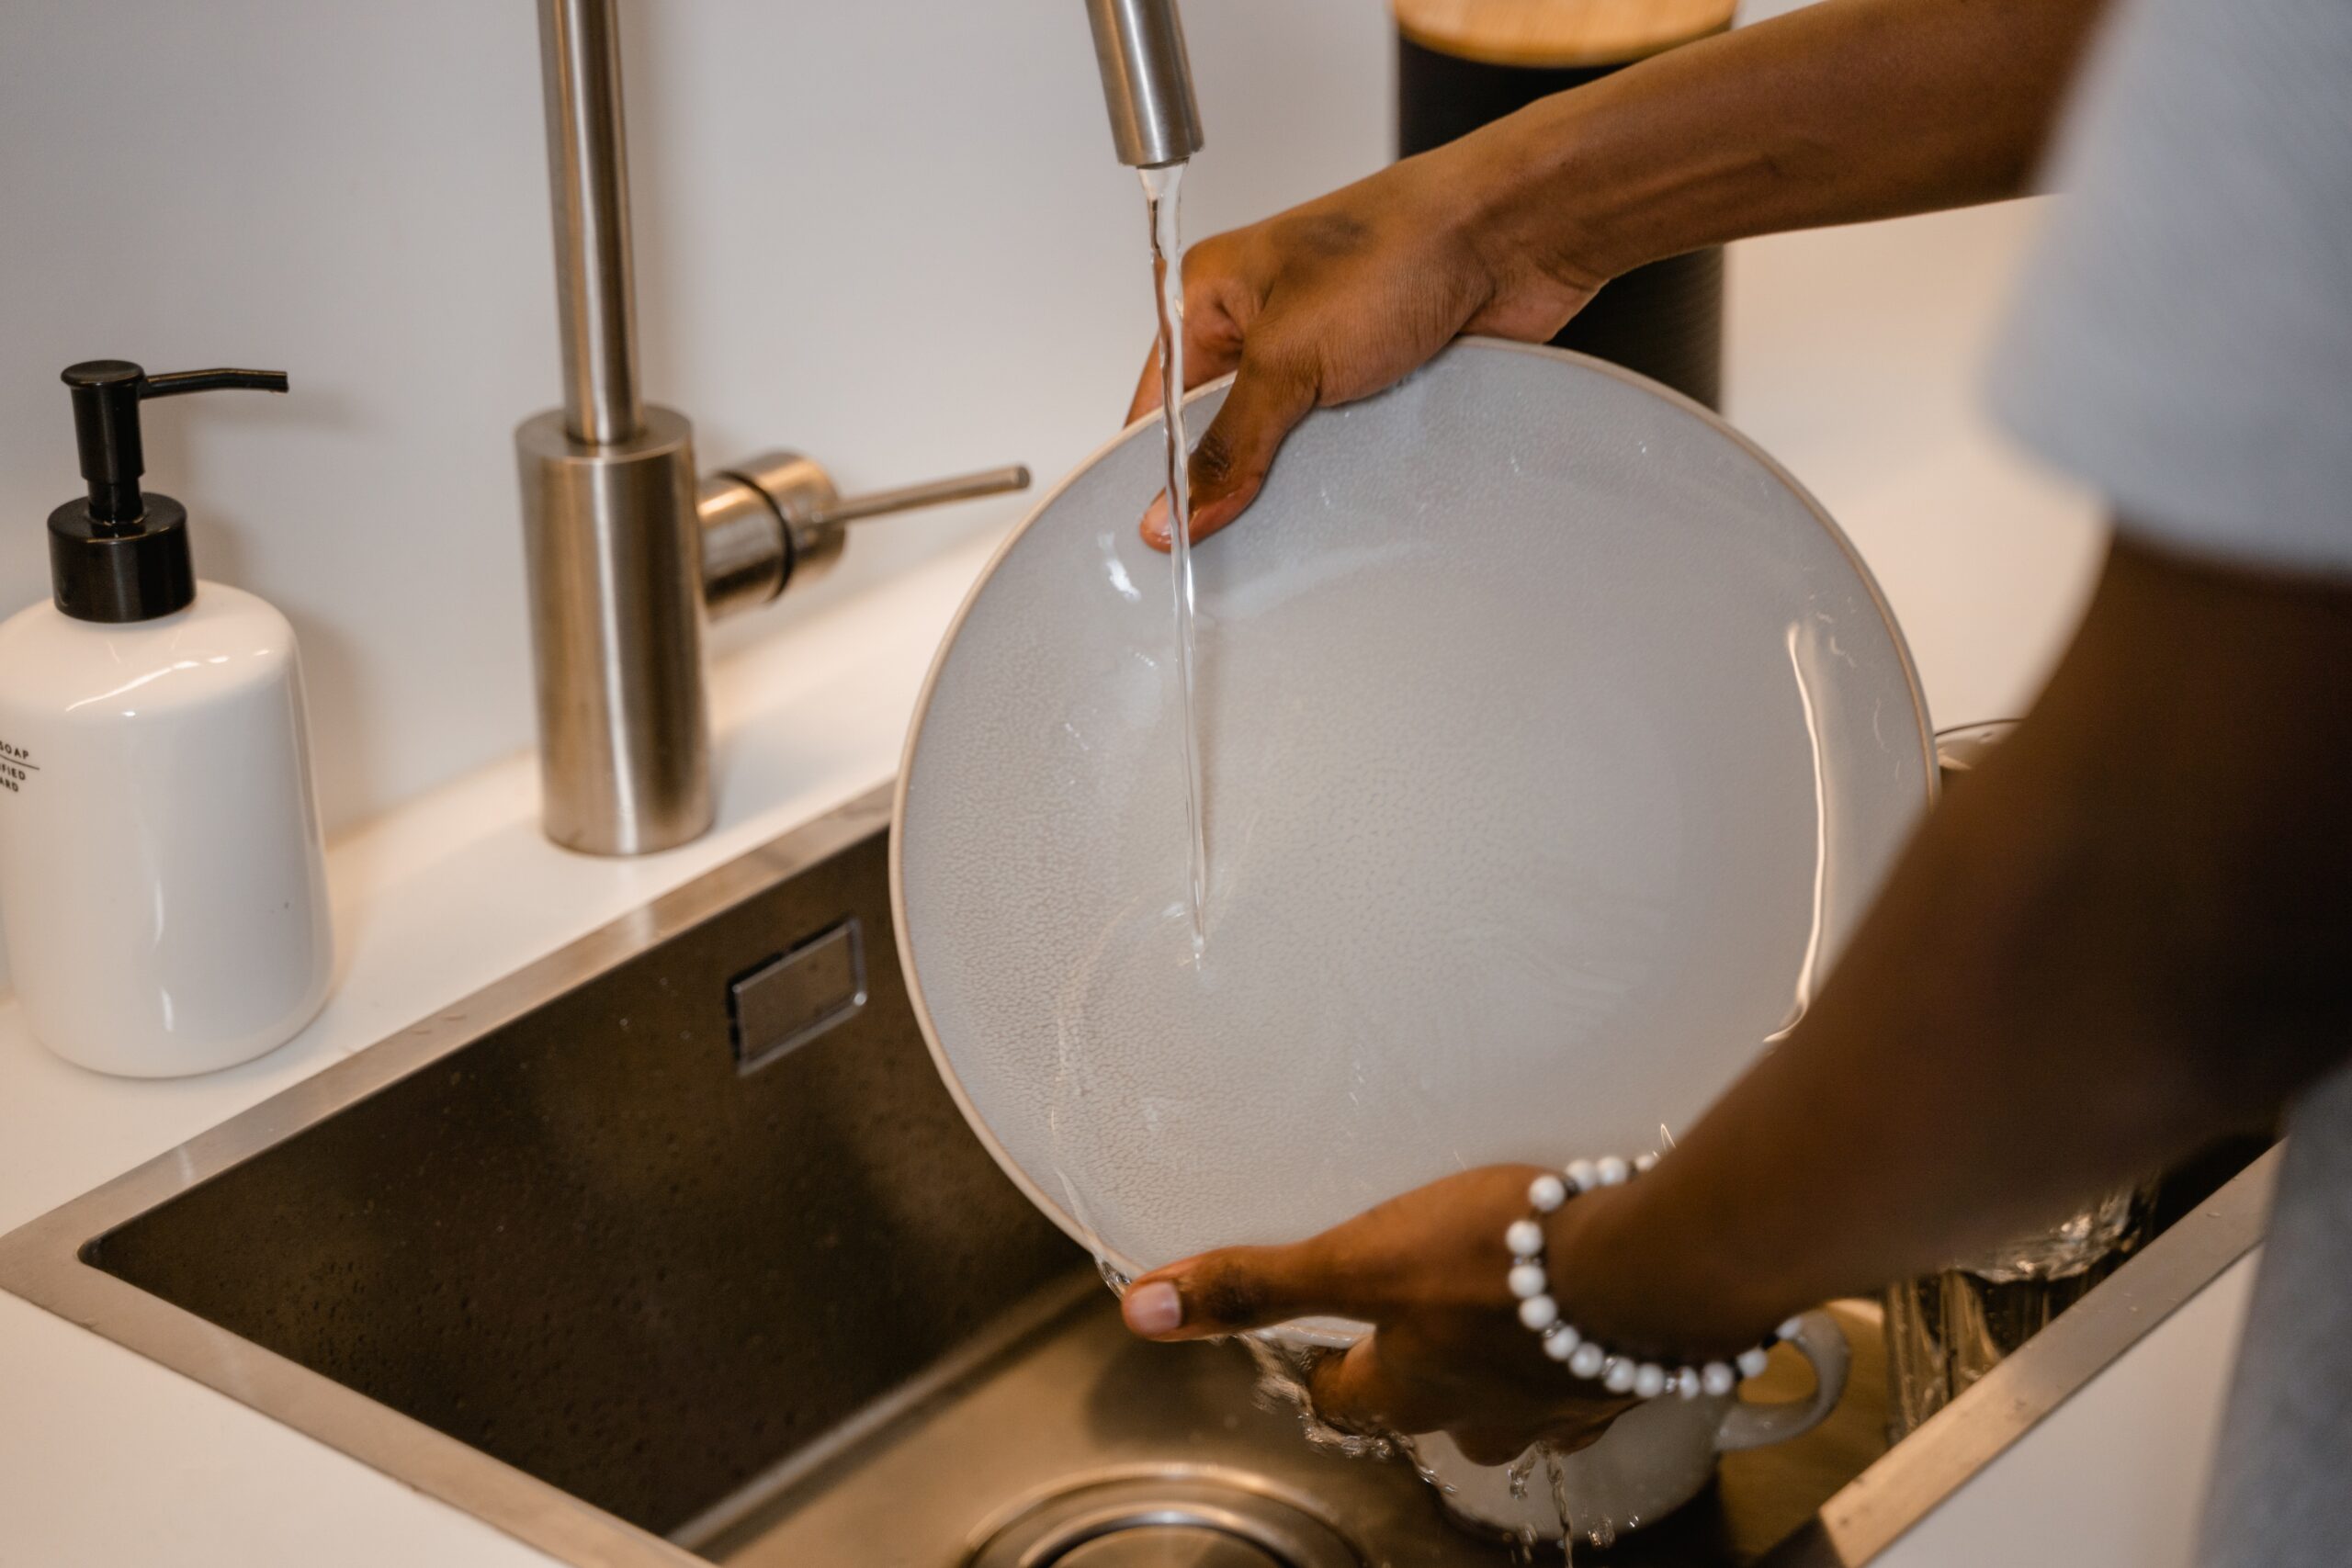 Person handwashing dishes in sink